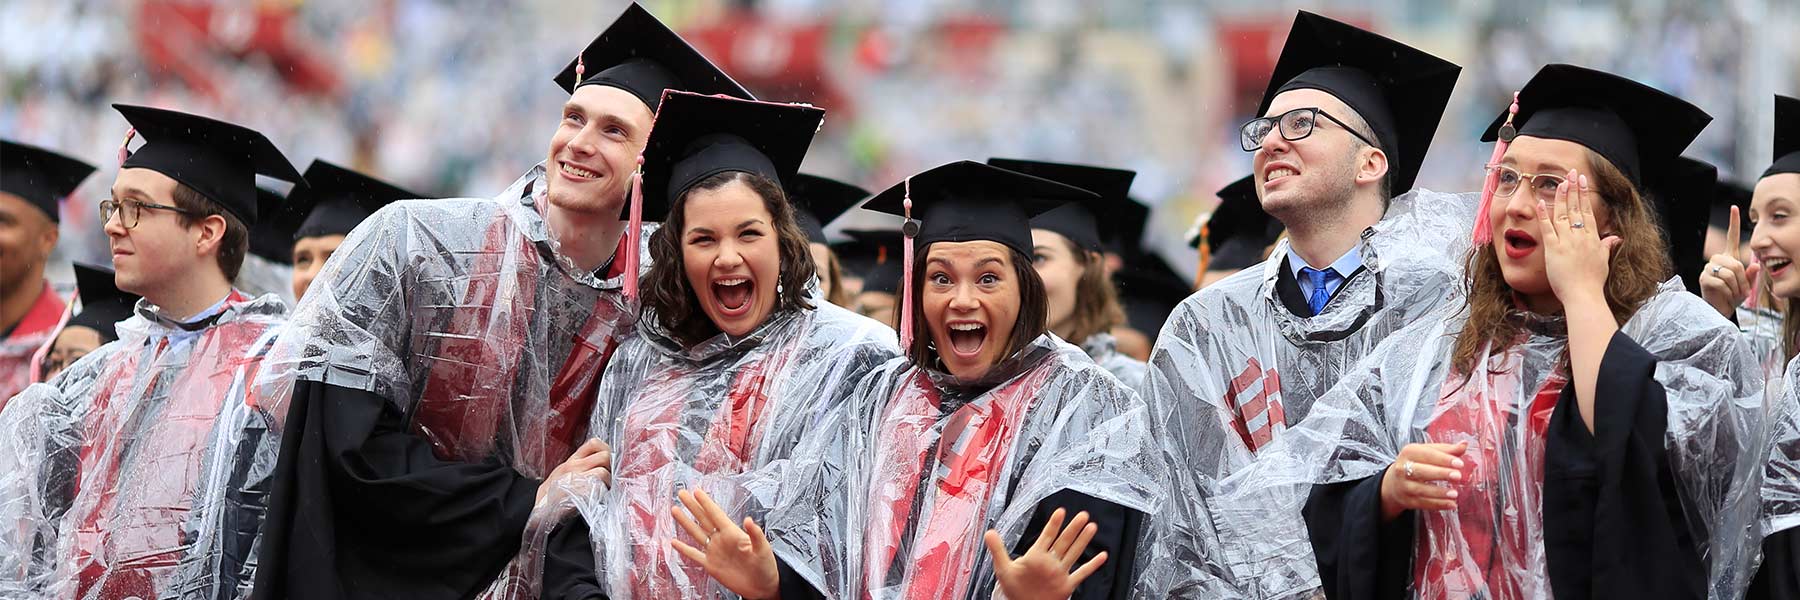 A group of graduates in caps, gowns and ponchos laugh while rain falls